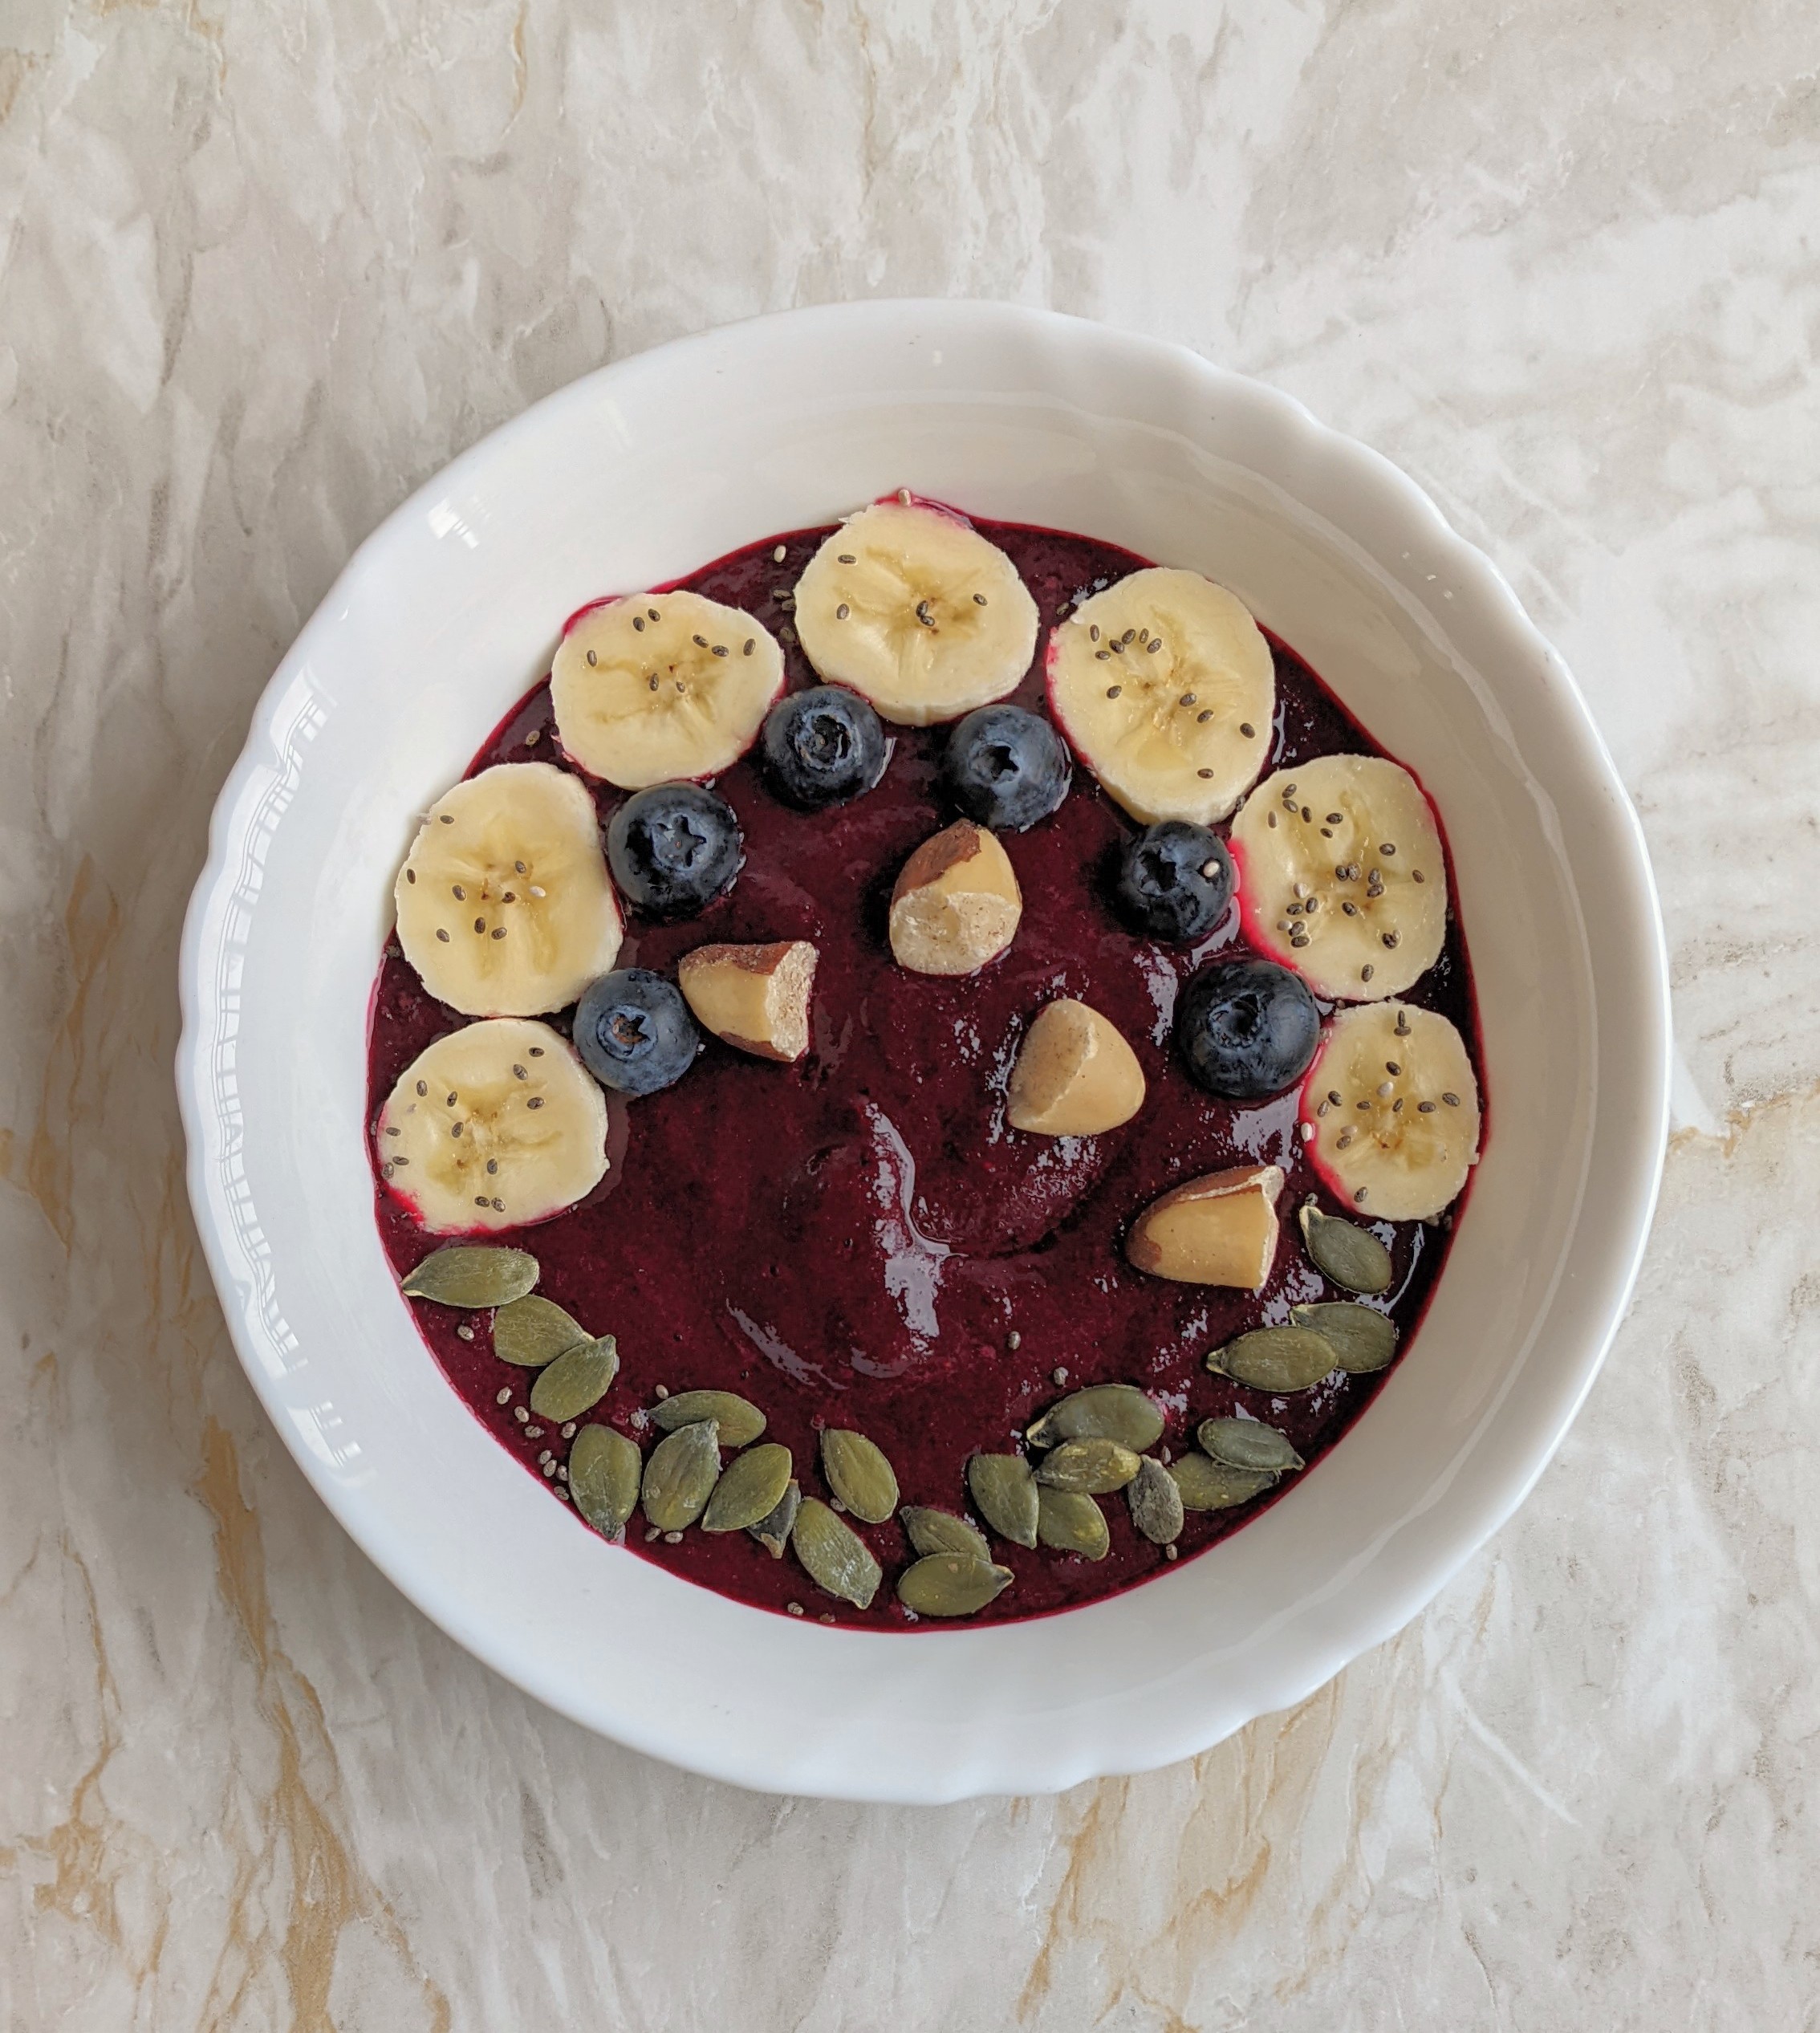 beetroot-banana-blueberry-amla-powder-smoothie-with-brazil-nuts-chia-seeds-pumpkin-seeds-breakfast-bowls-smoothie-bowls-weight-loss-bowls-recipes-vegan-vegetarian-recipes-healthy-food